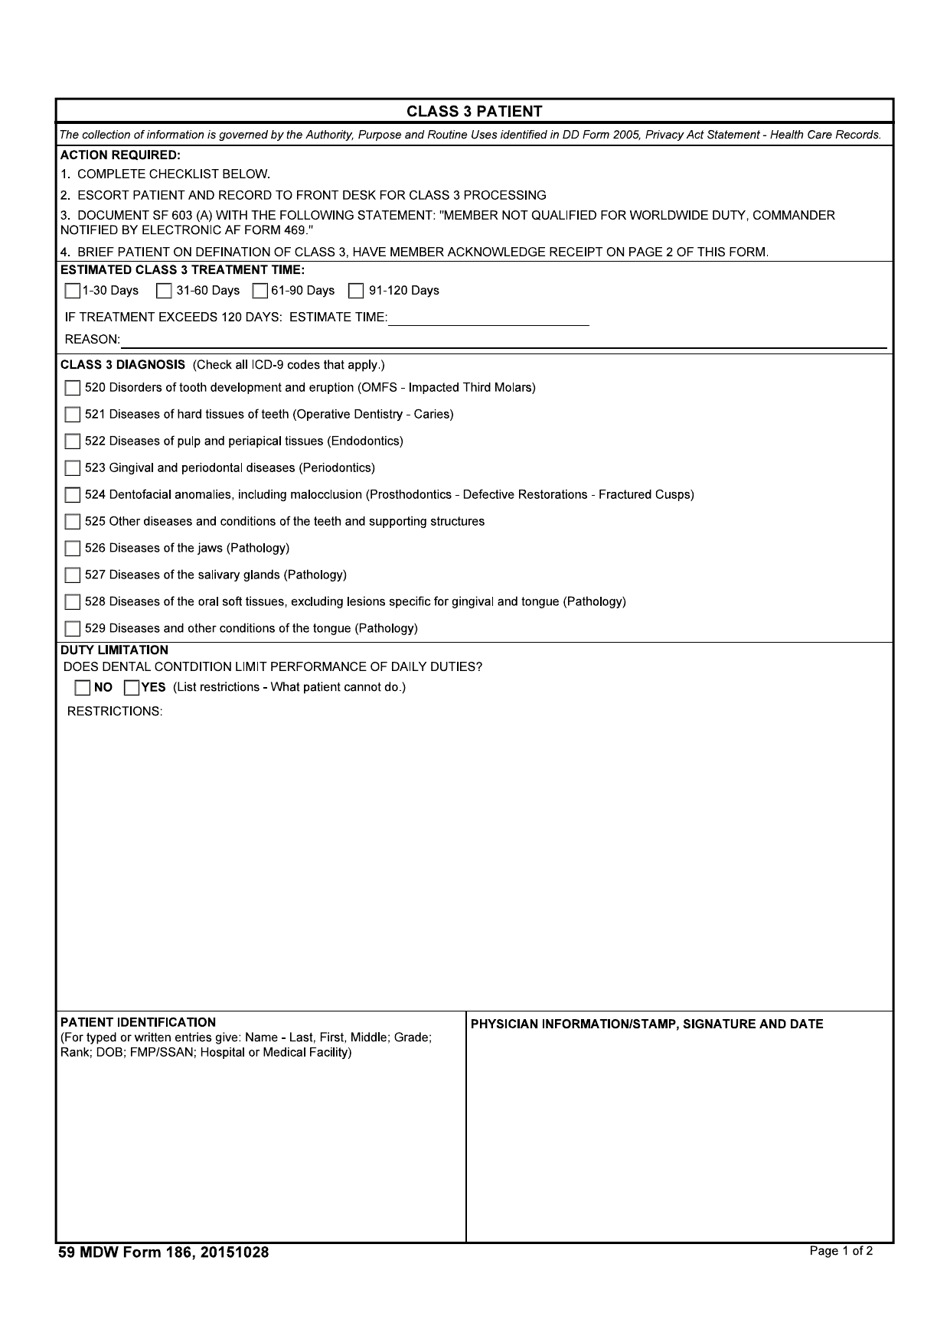 59 MDW Form 186 Class 3 Patient, Page 1